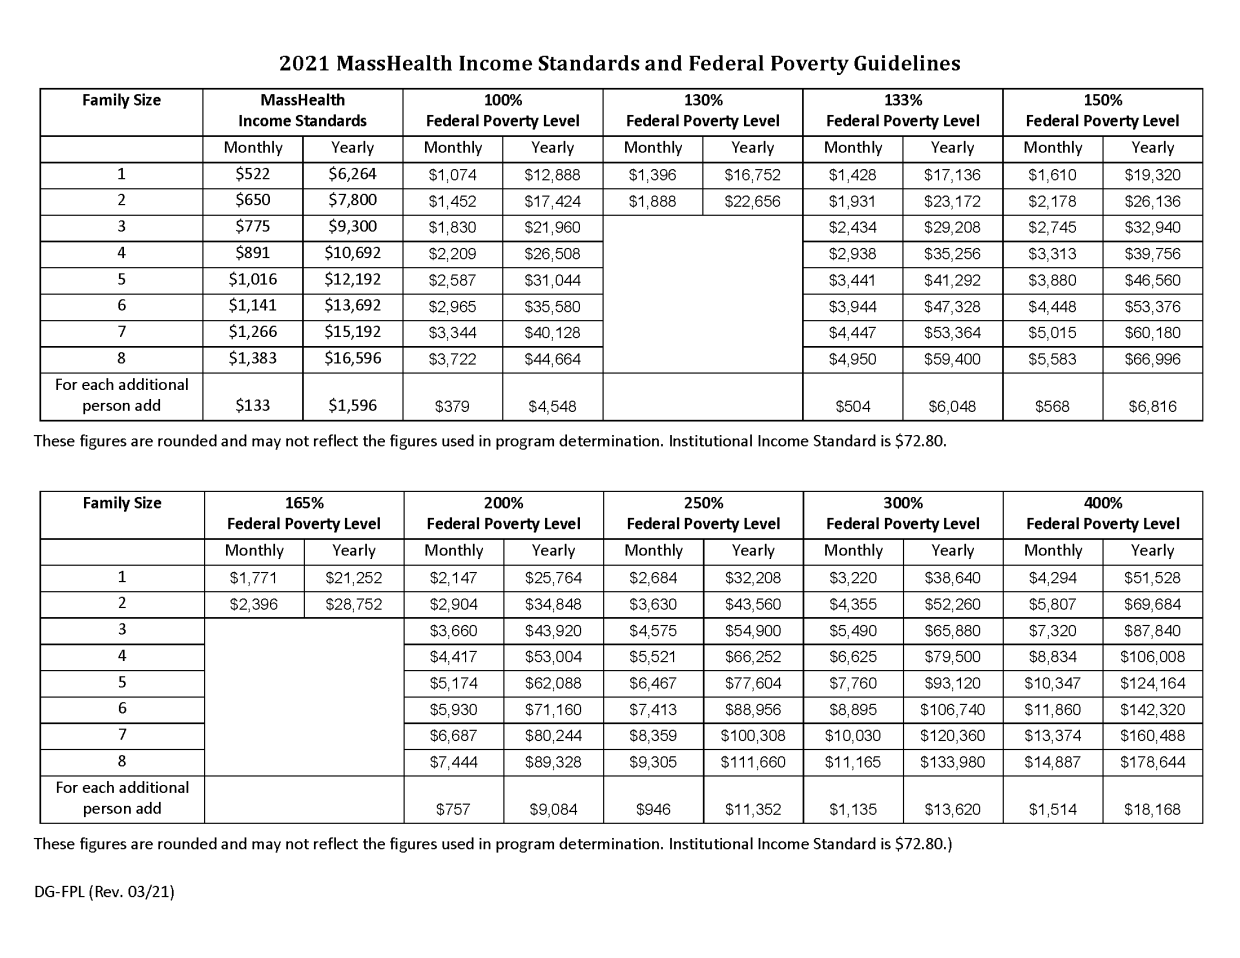 Program financial guidelines for certain MassHealth applicants and